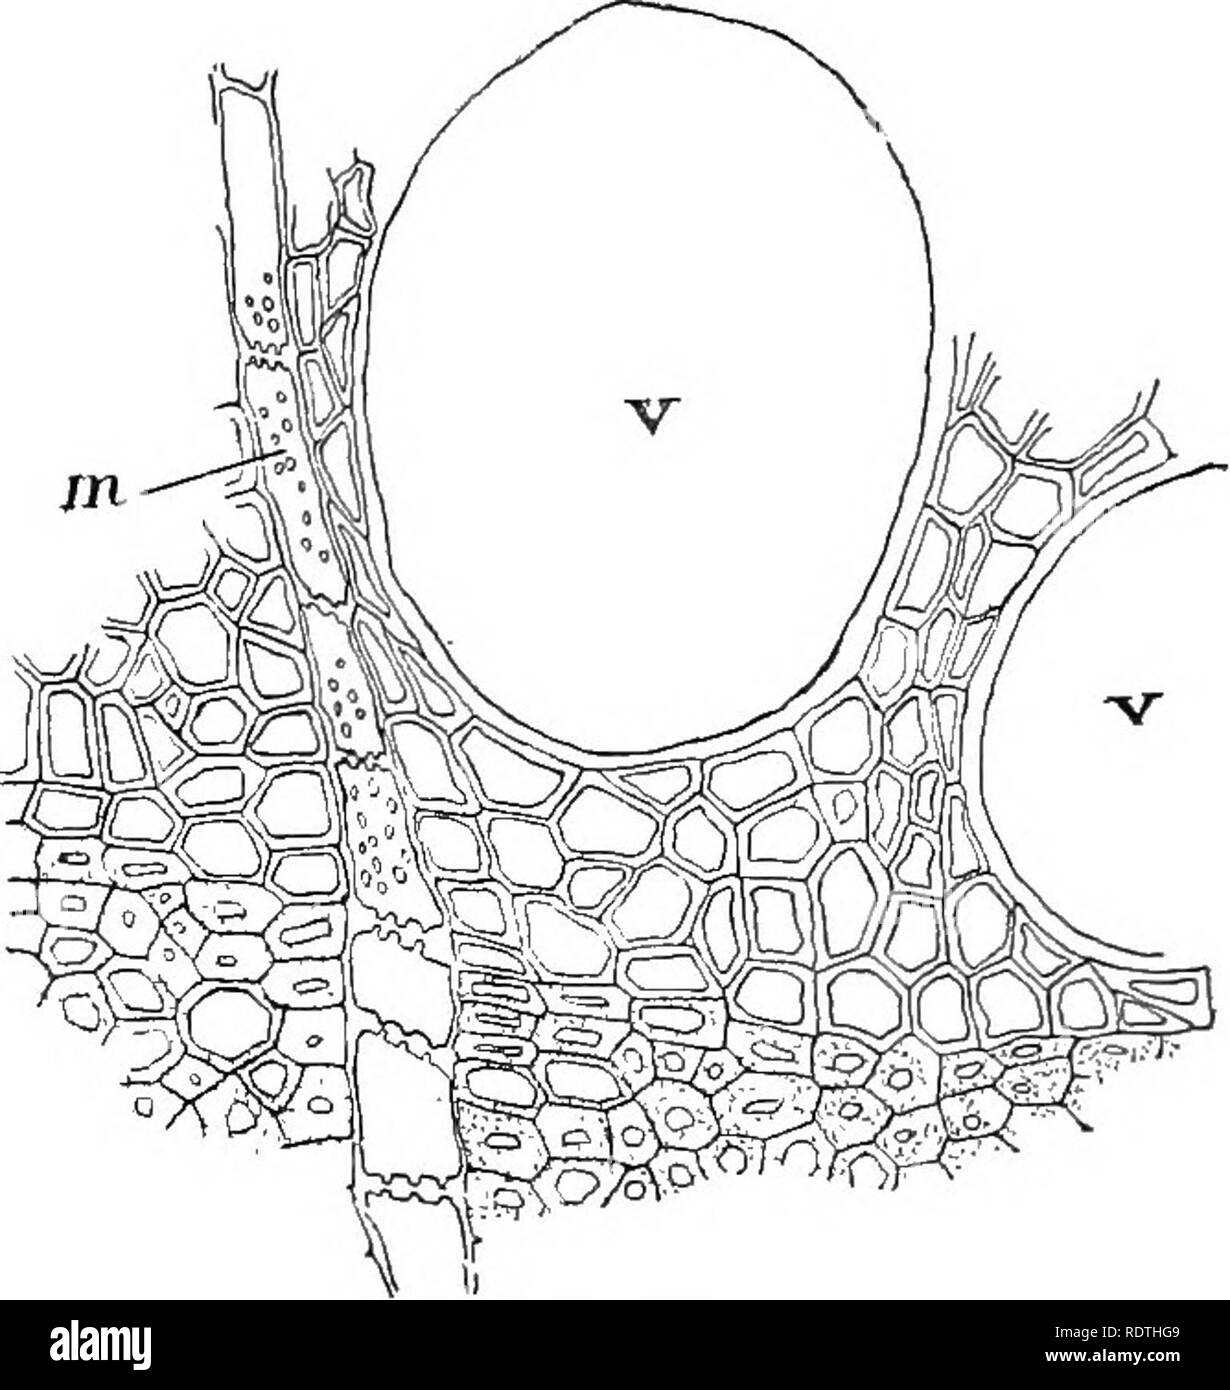 . Nature and development of plants. Botany. Fig. 56. Fig. 57. Fig. 56. Diagram of a cross-section of a stem of black oak four years old; p, pith; I, 2, 3, 4, annual rings of xylem; c, cambium cylinder; ph, phloem; cr, cortex; ch, cork; m, medullary rays. Fig. 57. Magnified view of a portion of one of the bands of black oak in Fig. 56, showing the thick-walled summer wood succeeded by the thinner- walled cells and vessels. This association of cells causes the banded appear- ance of the annual rings of growth, m, medullary rays; v, vessels in the spring wood. produces firmer and denser tissues.  Stock Photo